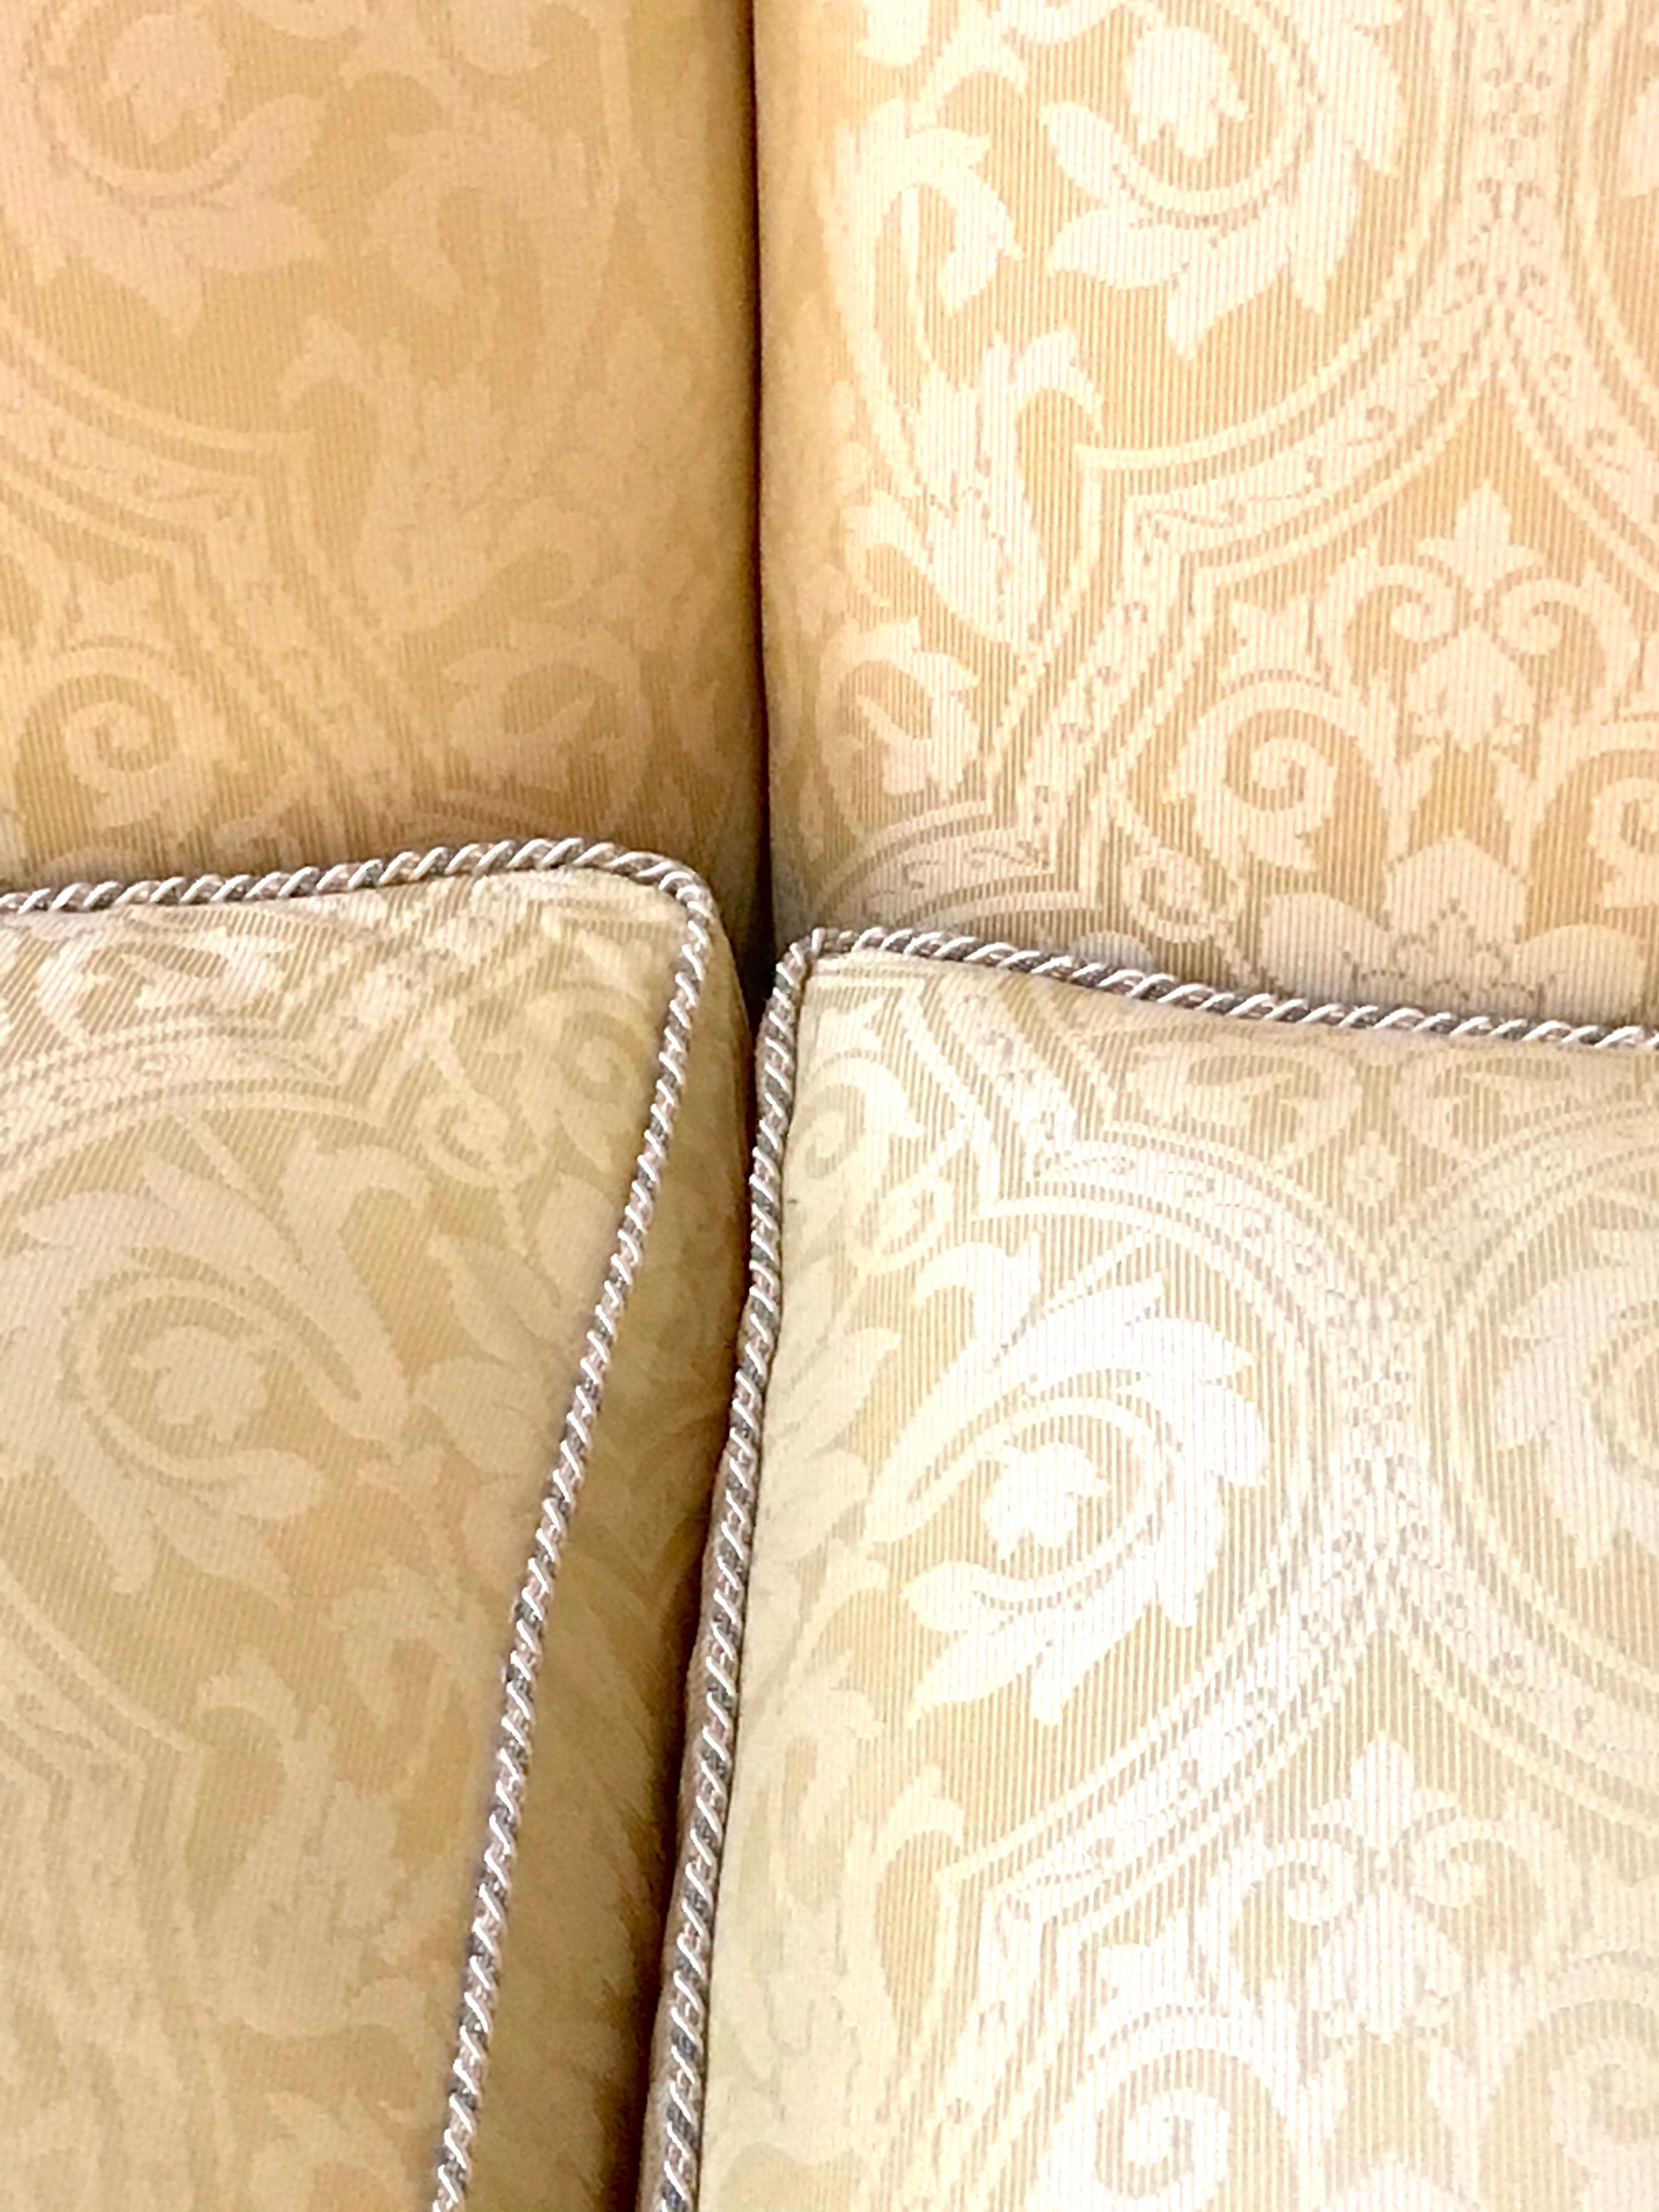 Large Overstuffed Settee in Damask Fully Lined Upholstery from O Henry House Ltd 3